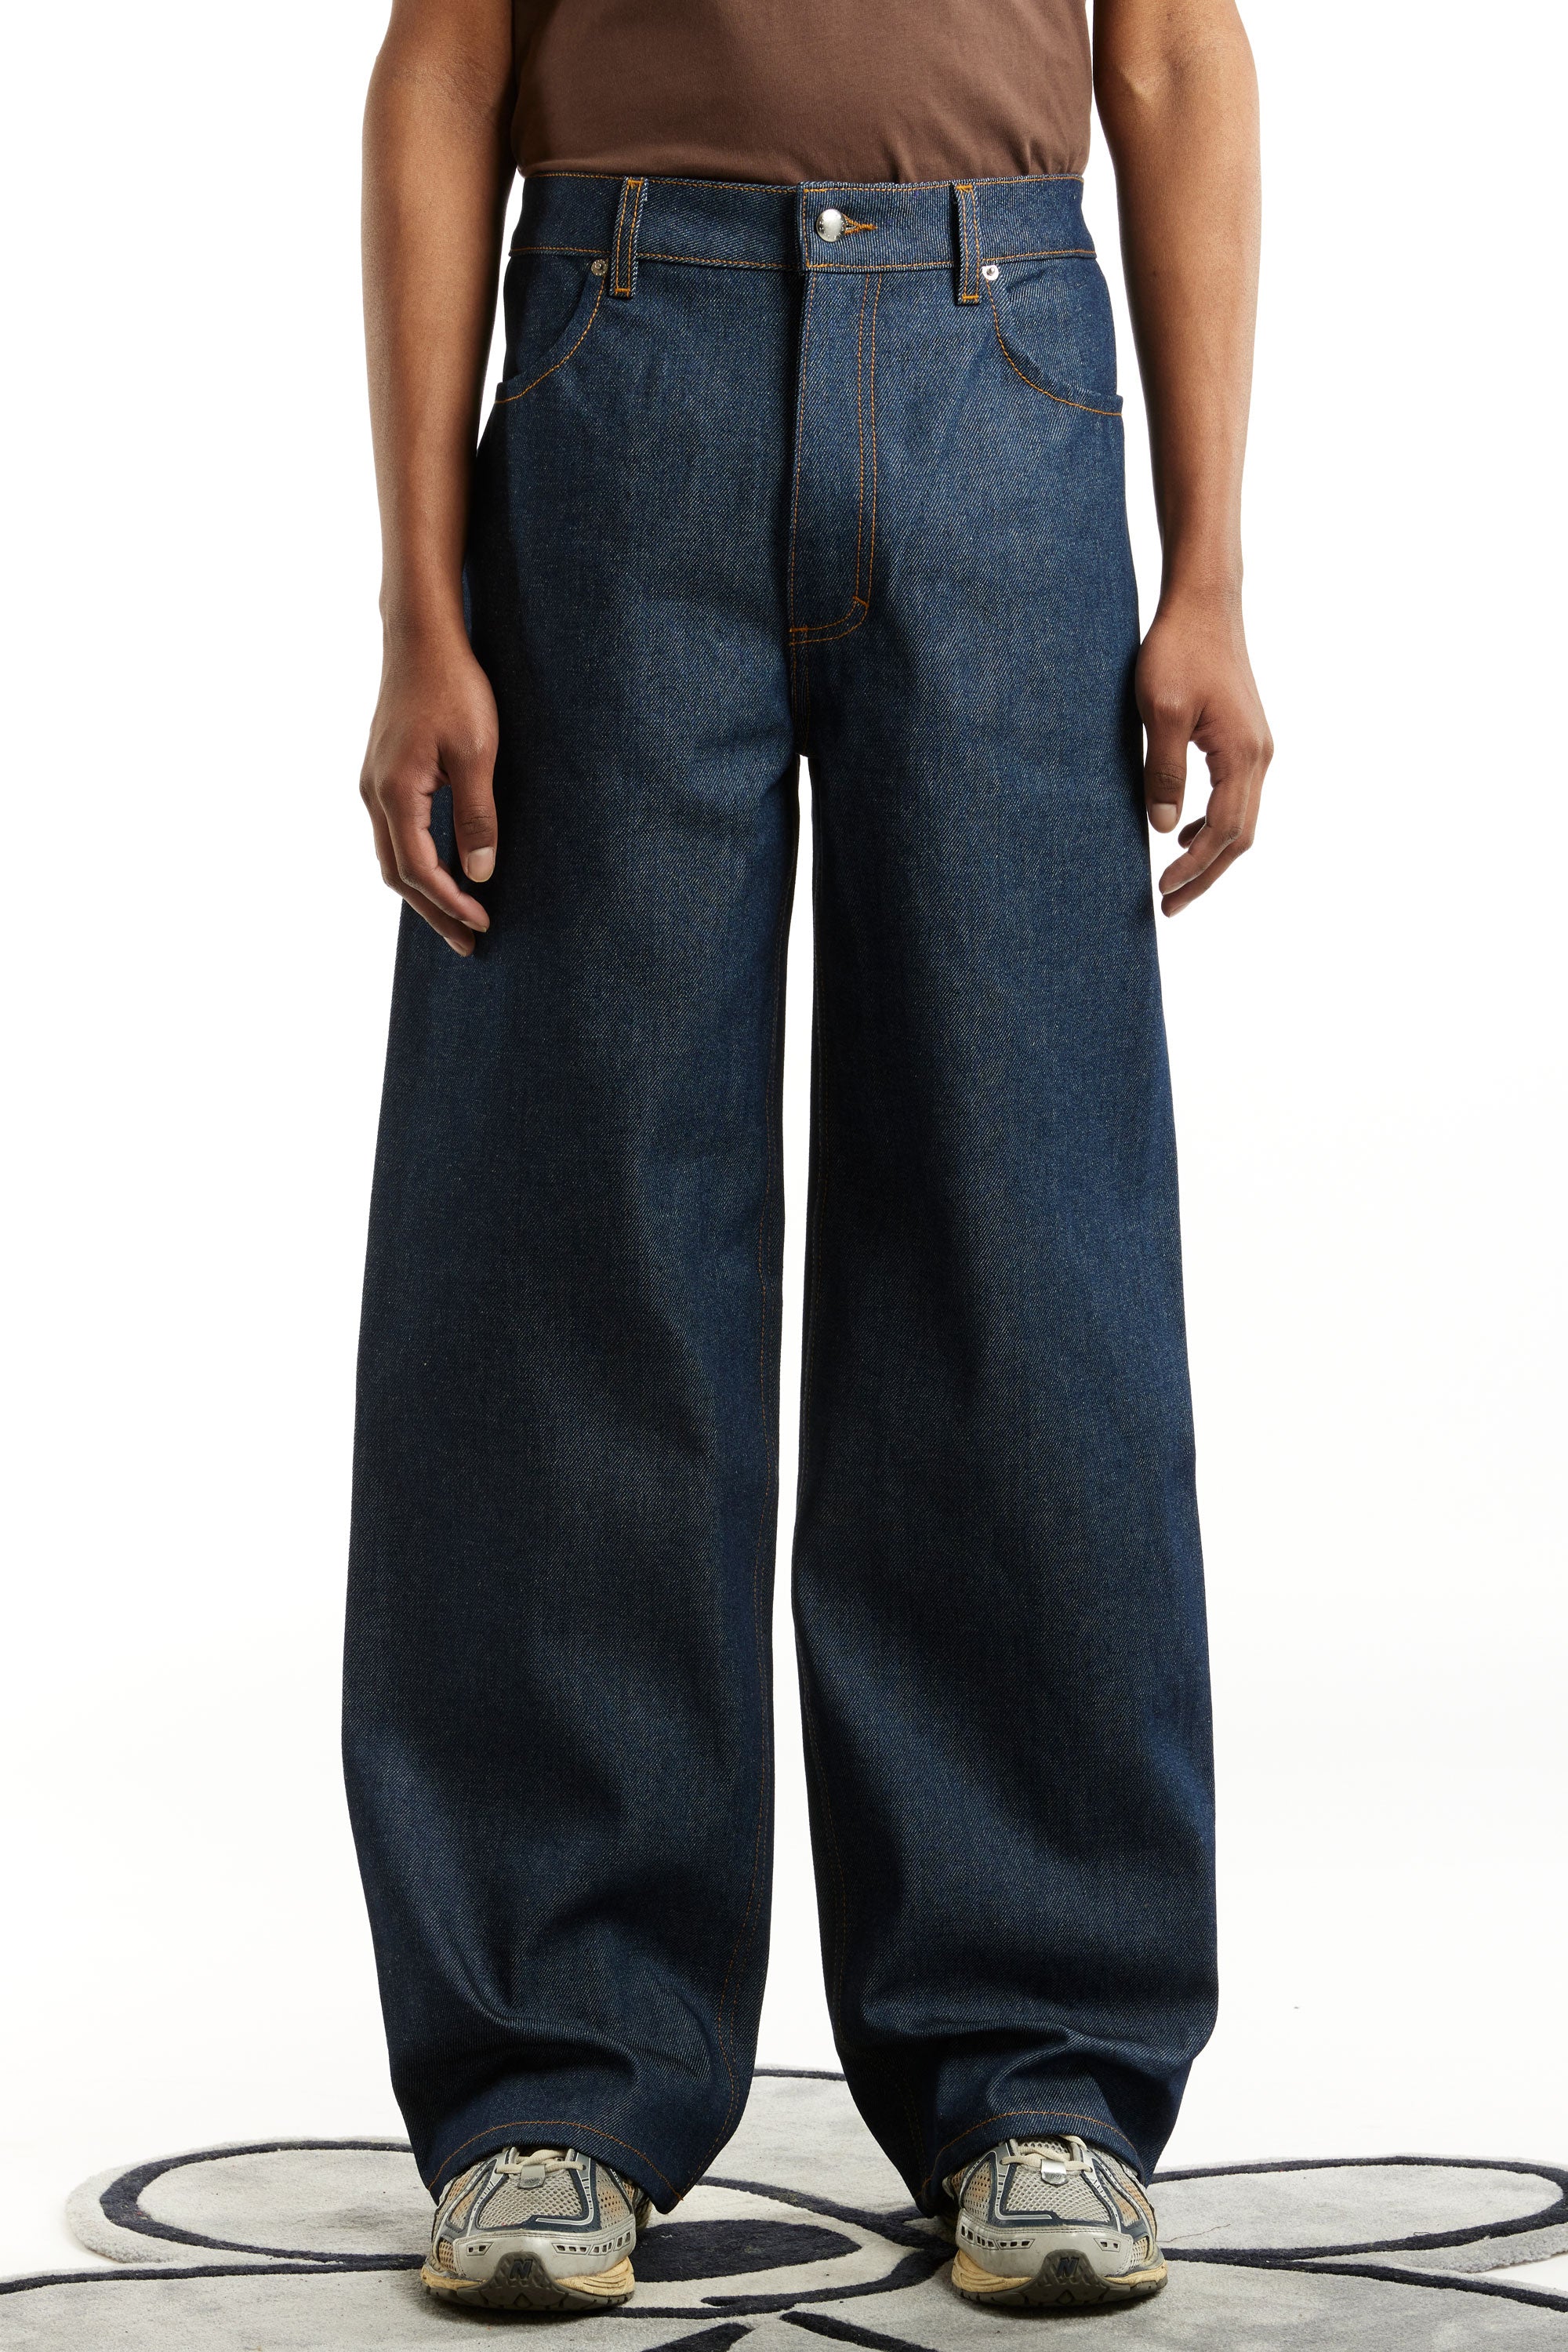 The ECKHAUS LATTA - WIDE LEG JEAN RAW  available online with global shipping, and in PAM Stores Melbourne and Sydney.